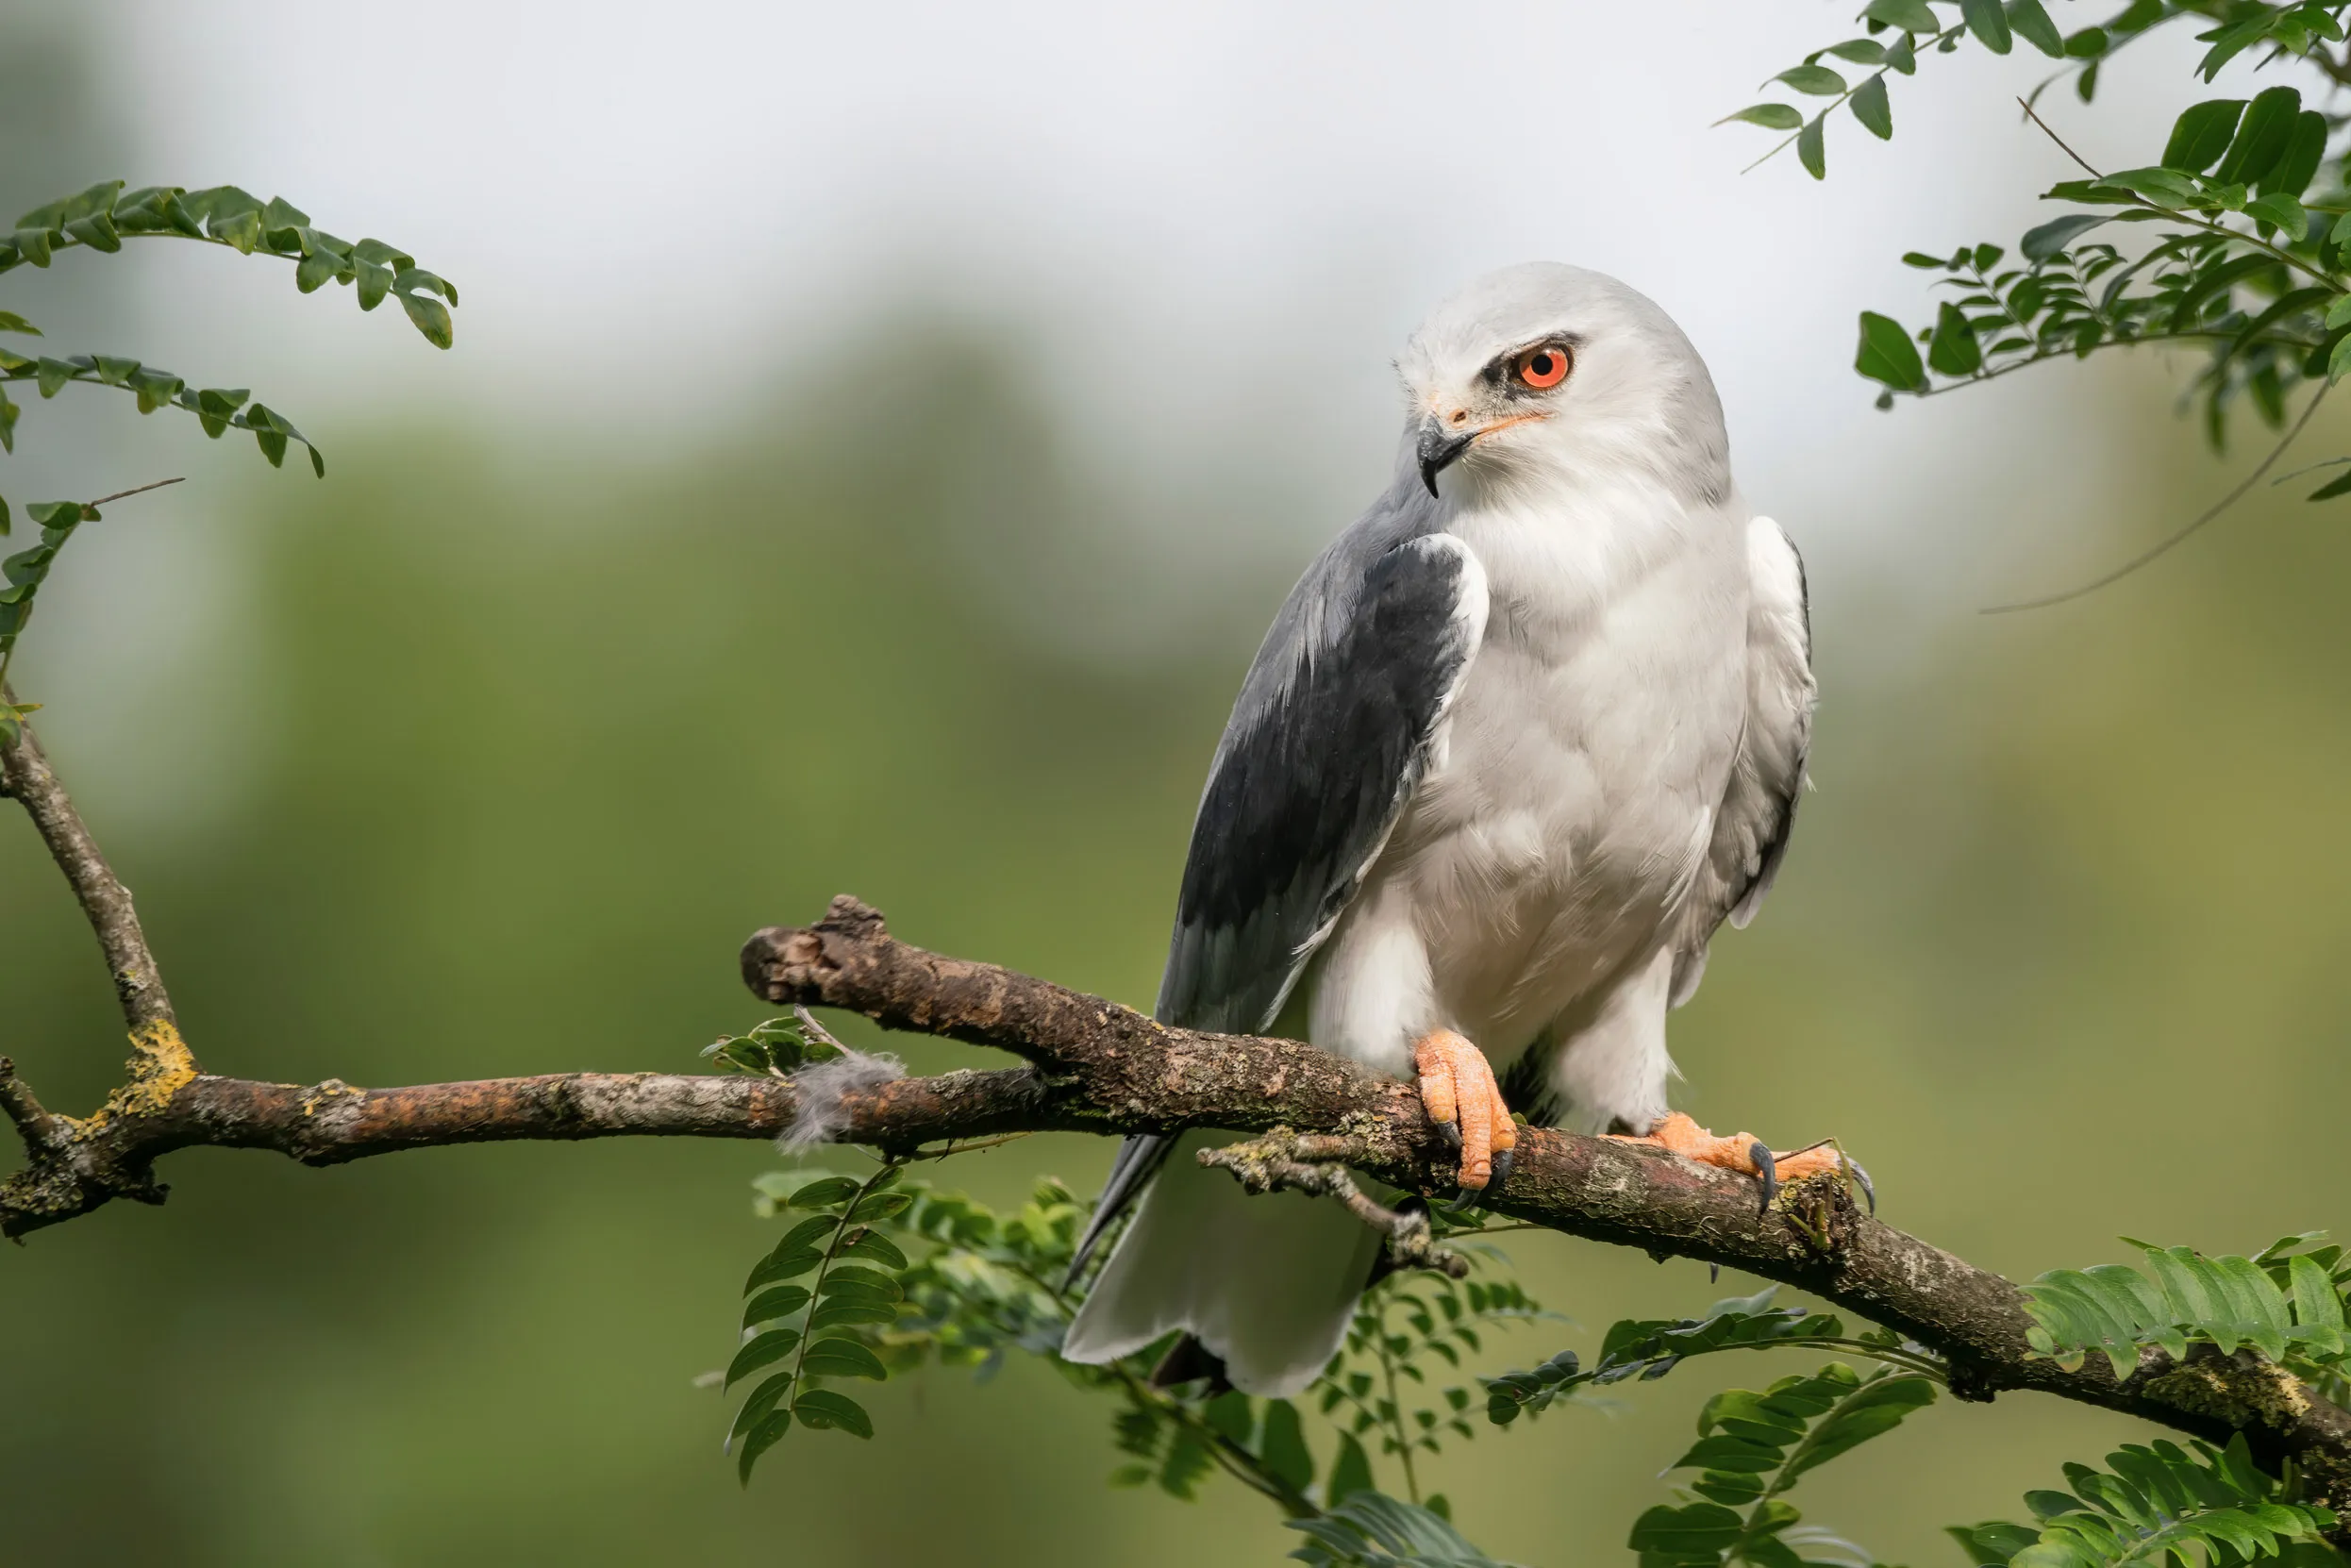 Black-winged Kite perched on a tree branch with green leaves.